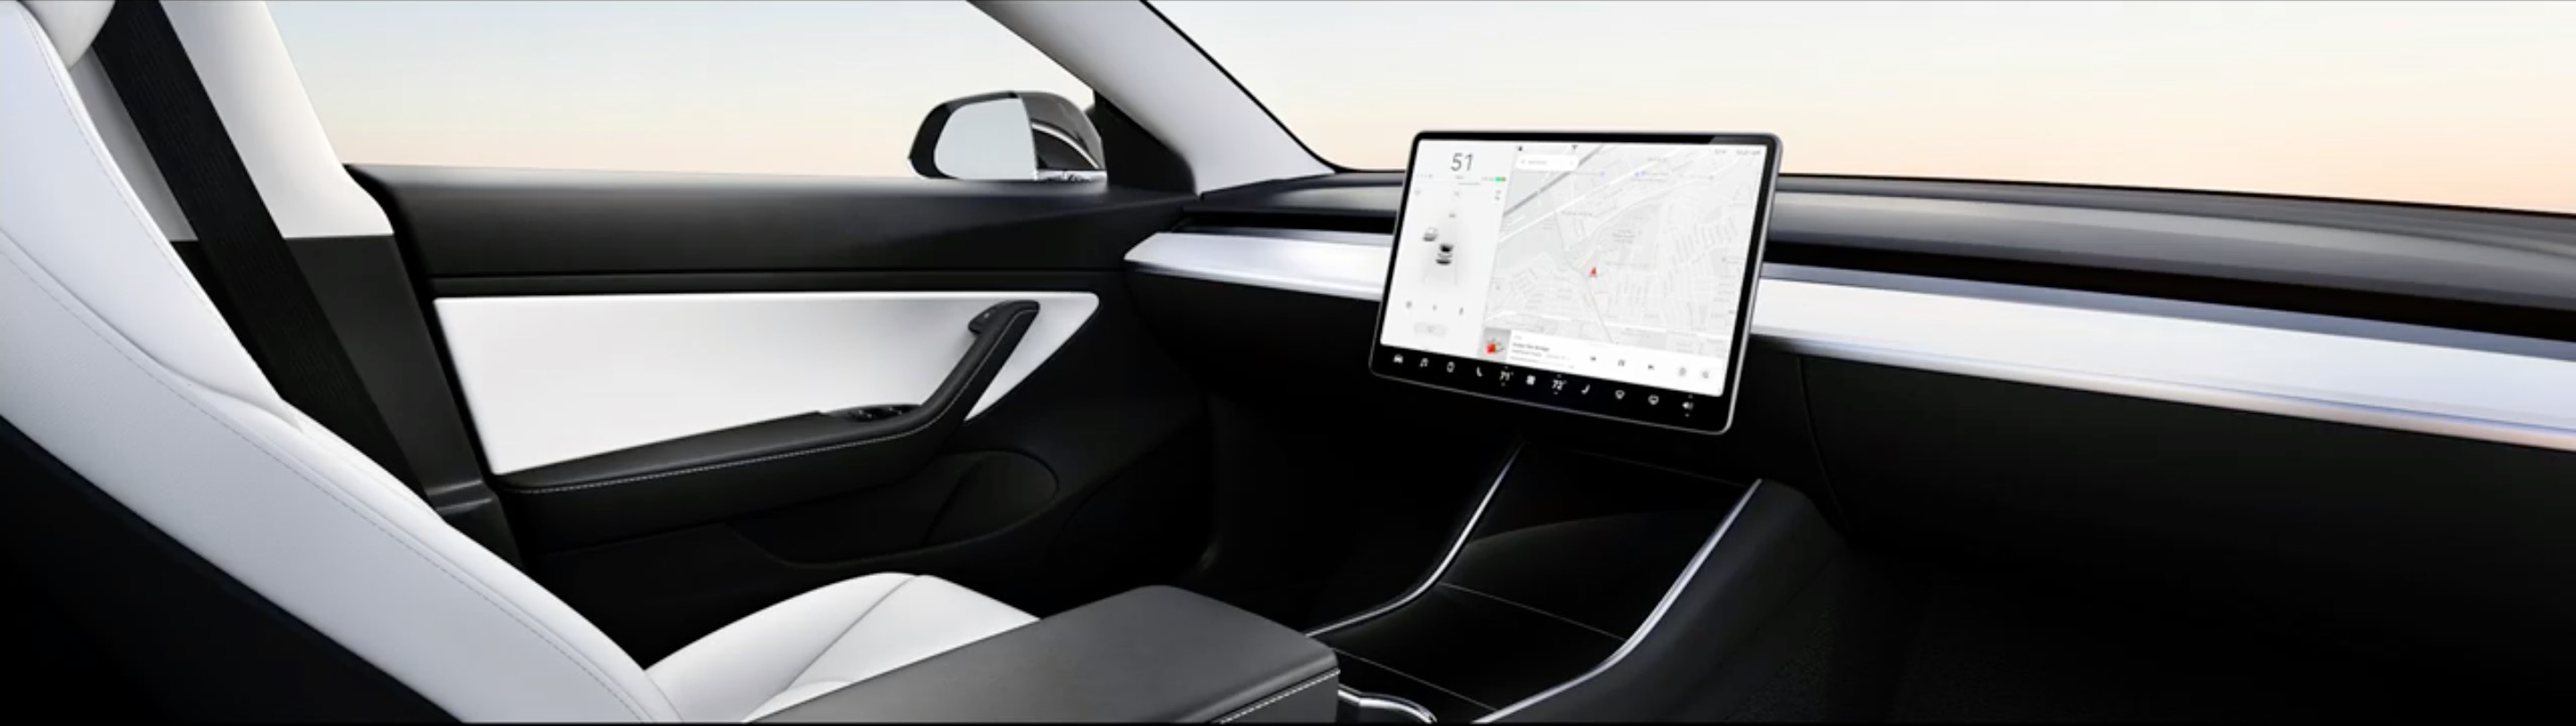 Tesla-self-driving-without-a-steering-wh